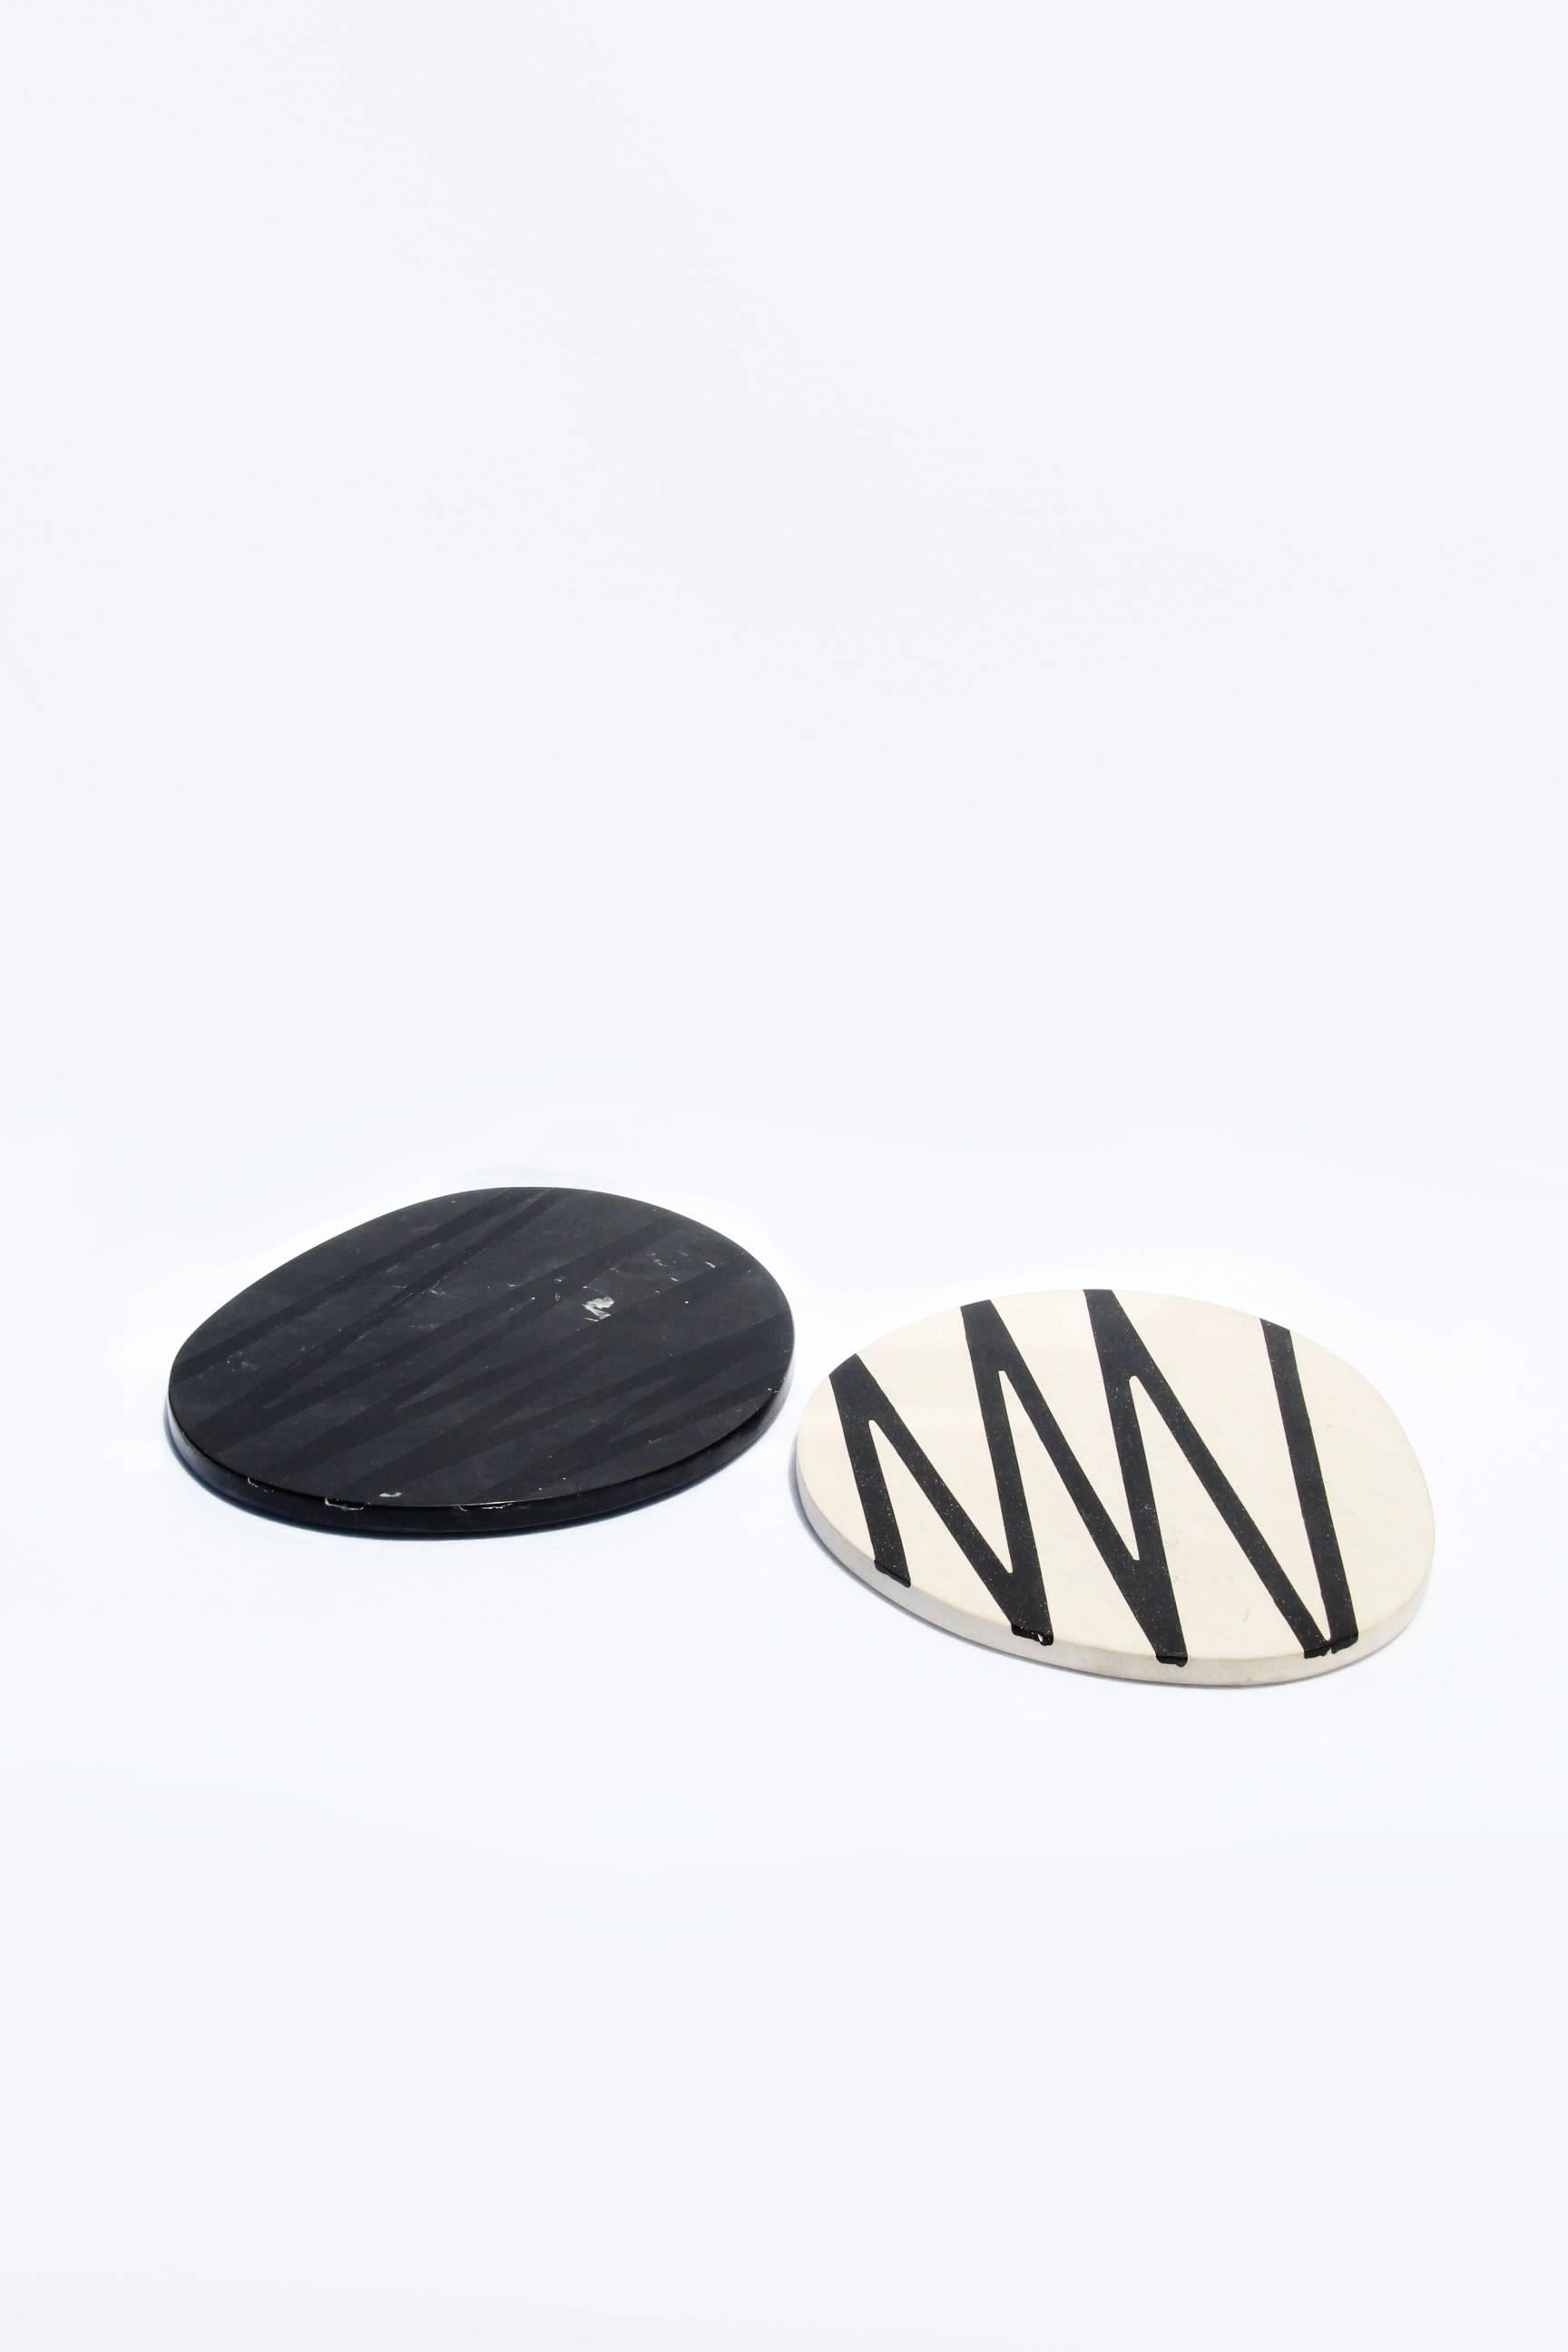 Board or Serving Plate Stone Resin Contemporary Style Black/White  For Sale 6